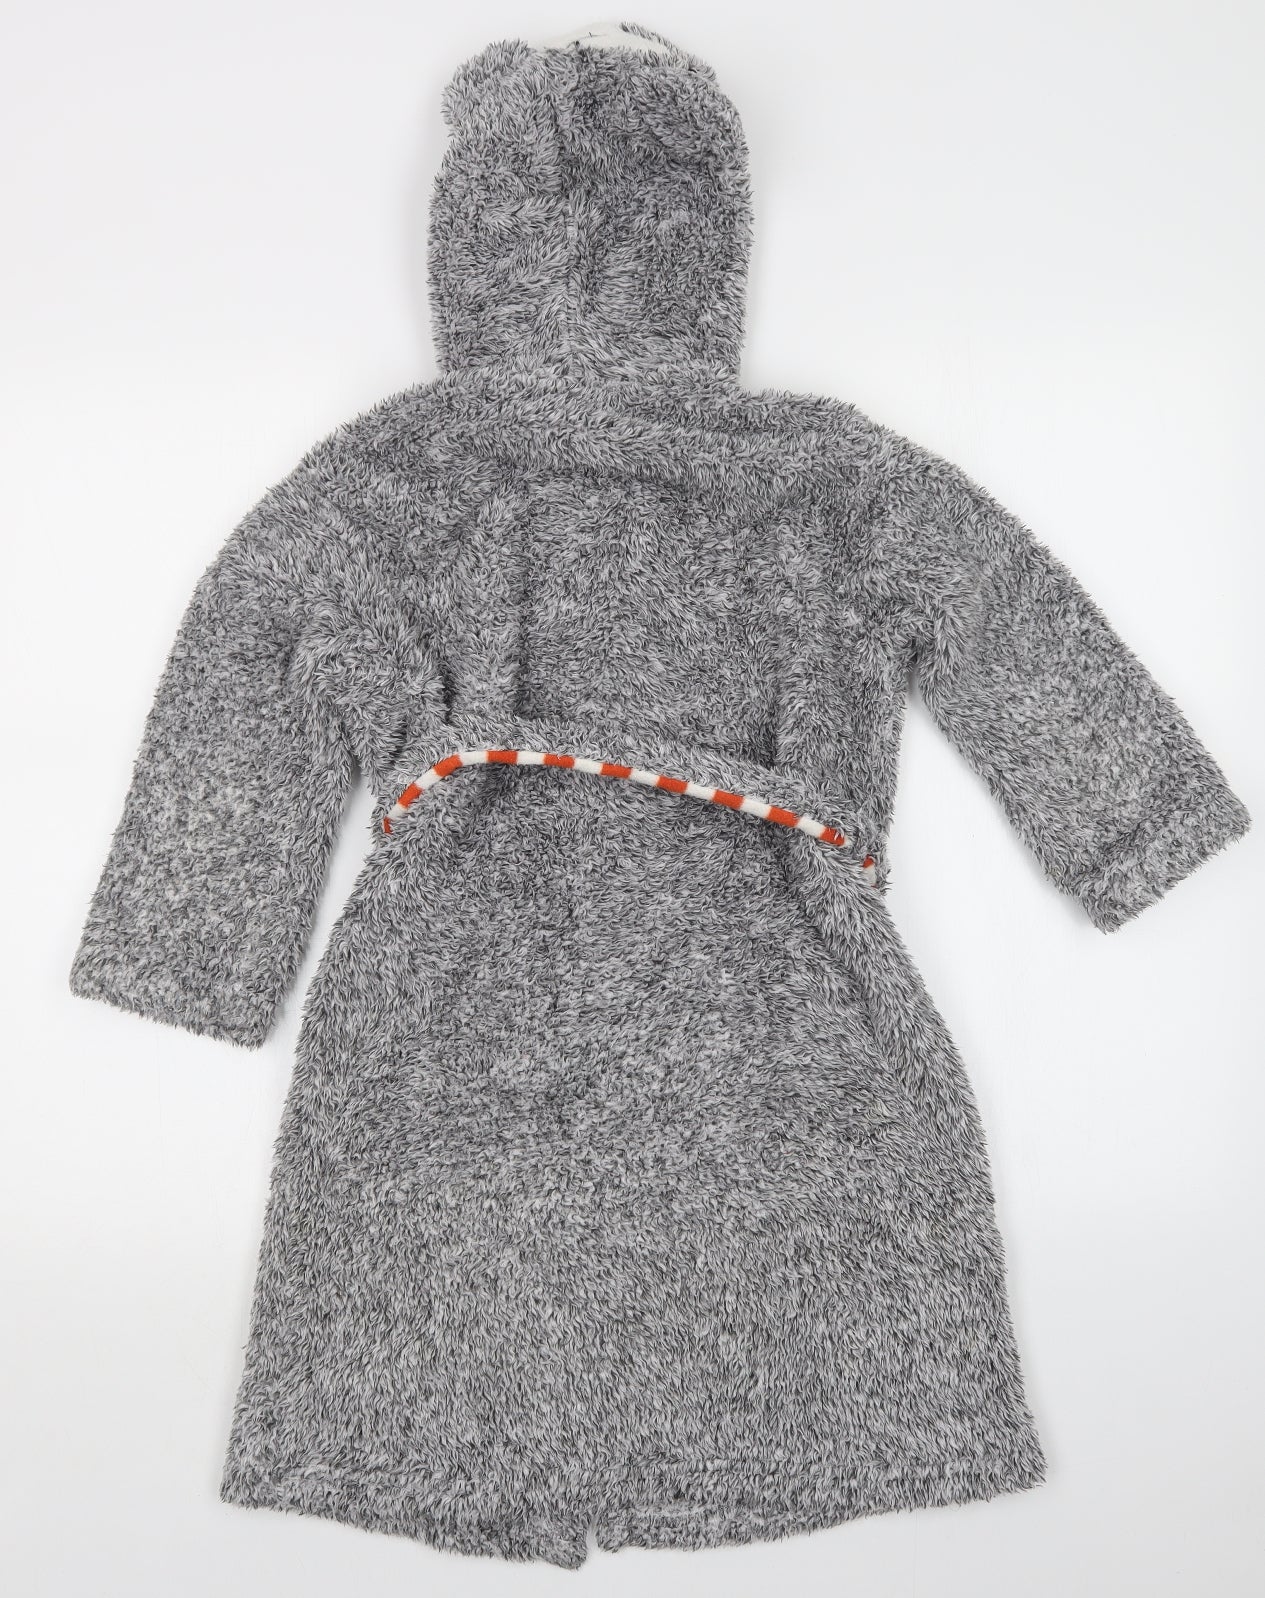 M&S Boys Grey    Gown Size 7-8 Years